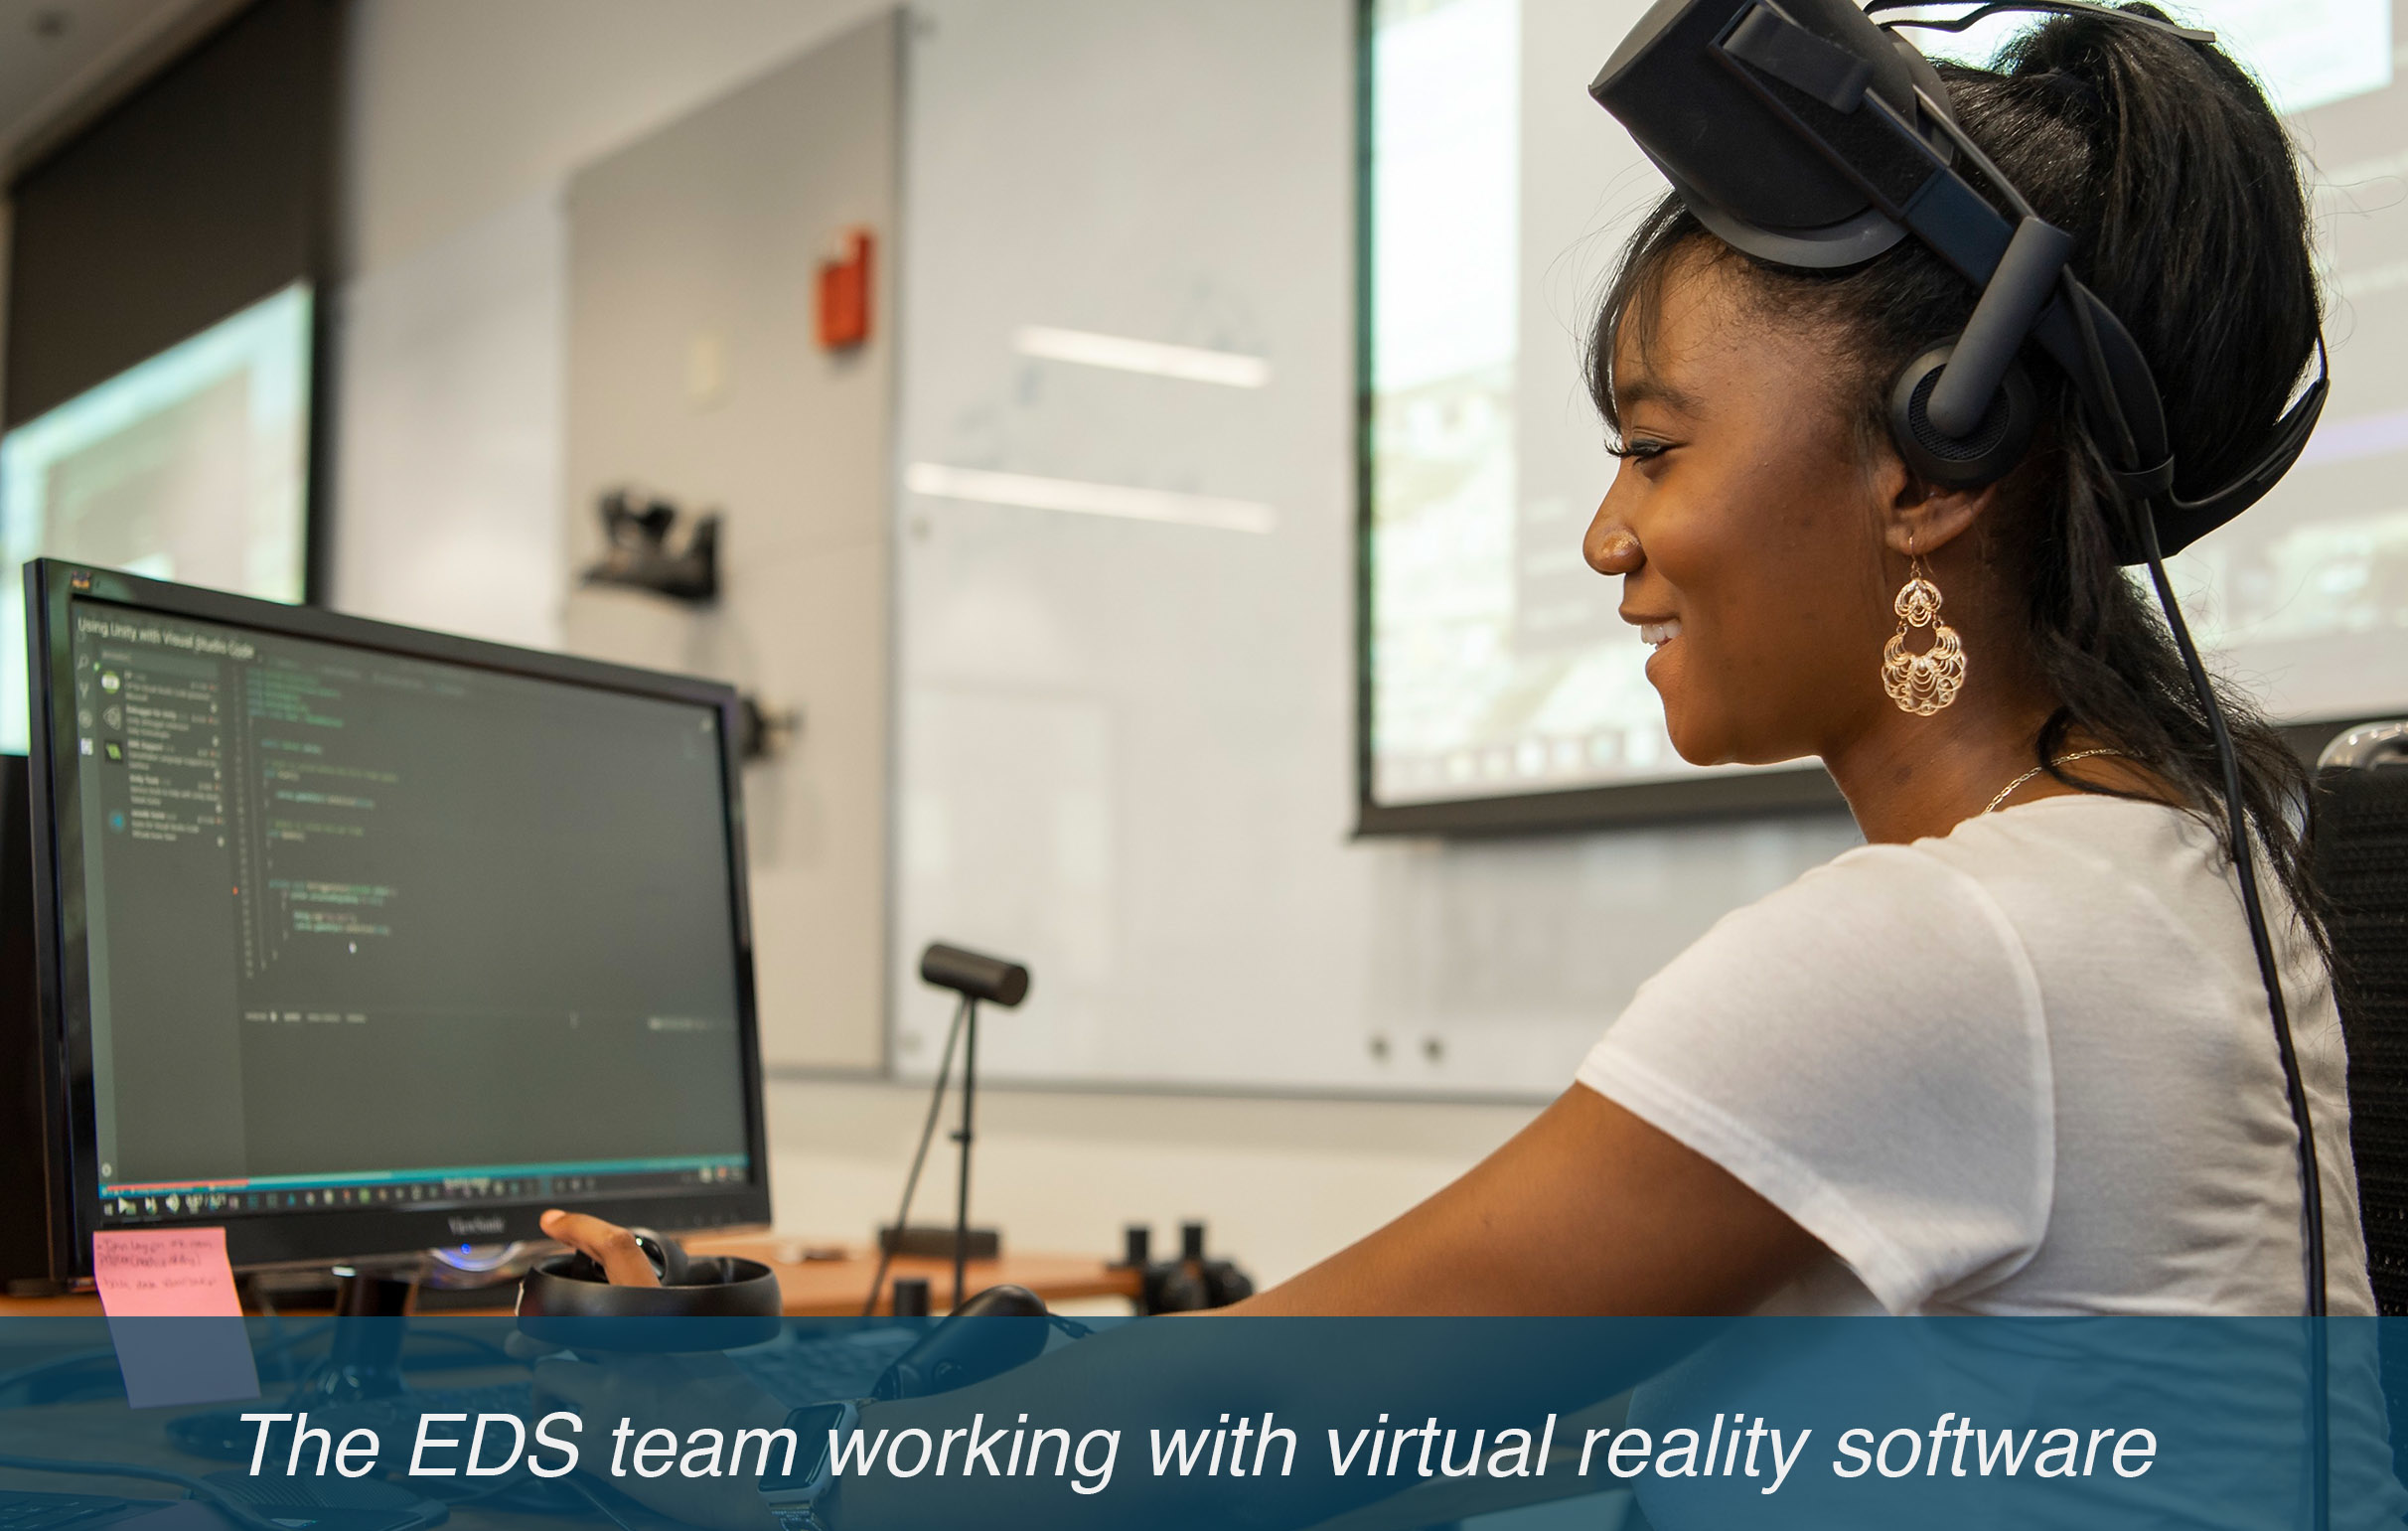 The EDS team working with virtual reality software